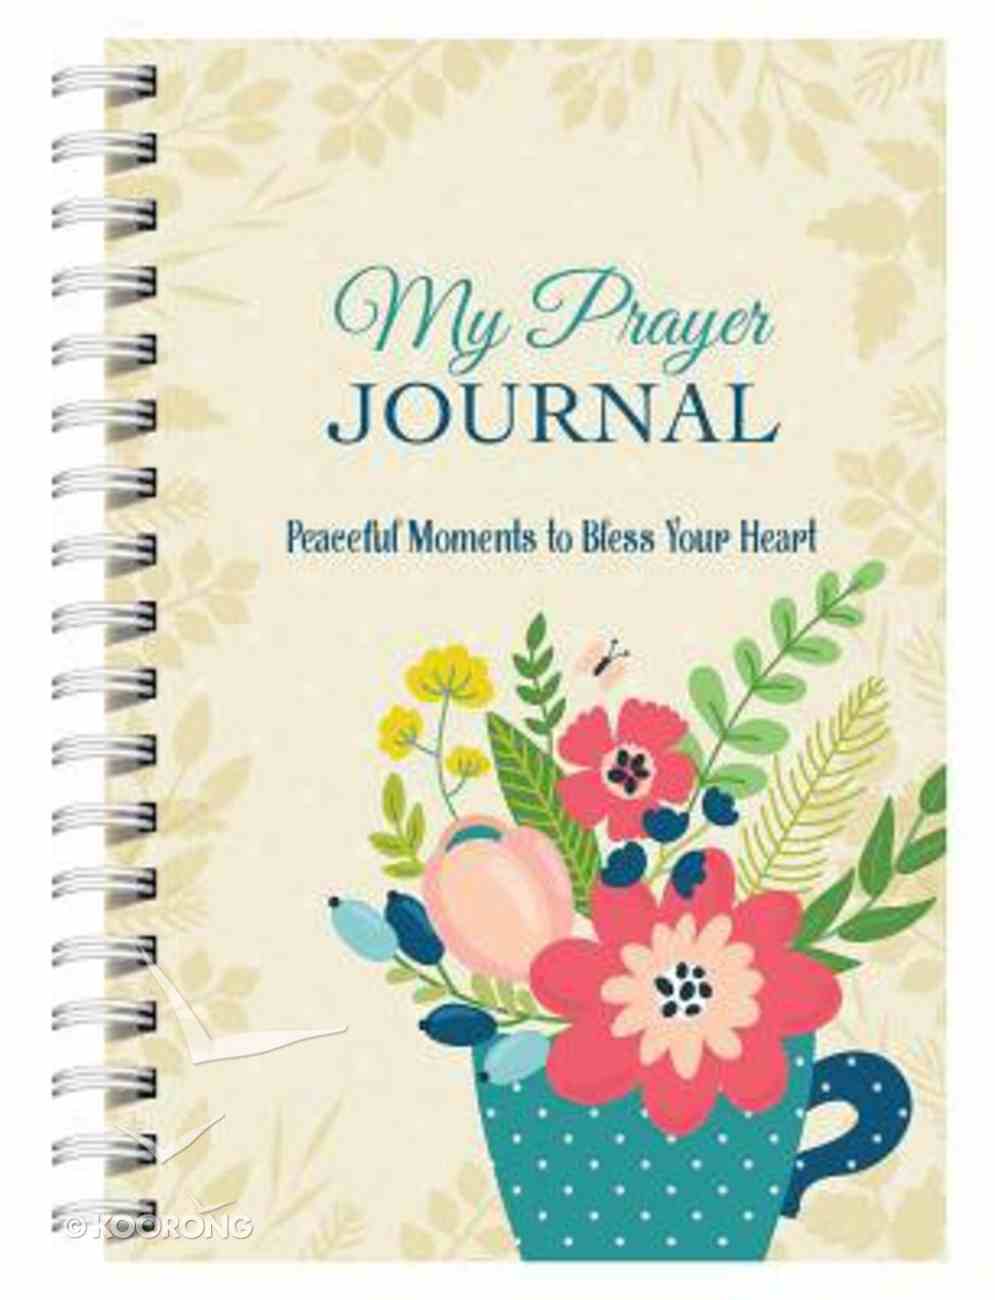 My Prayer Journal: Peaceful Moments to Bless Your Heart Spiral